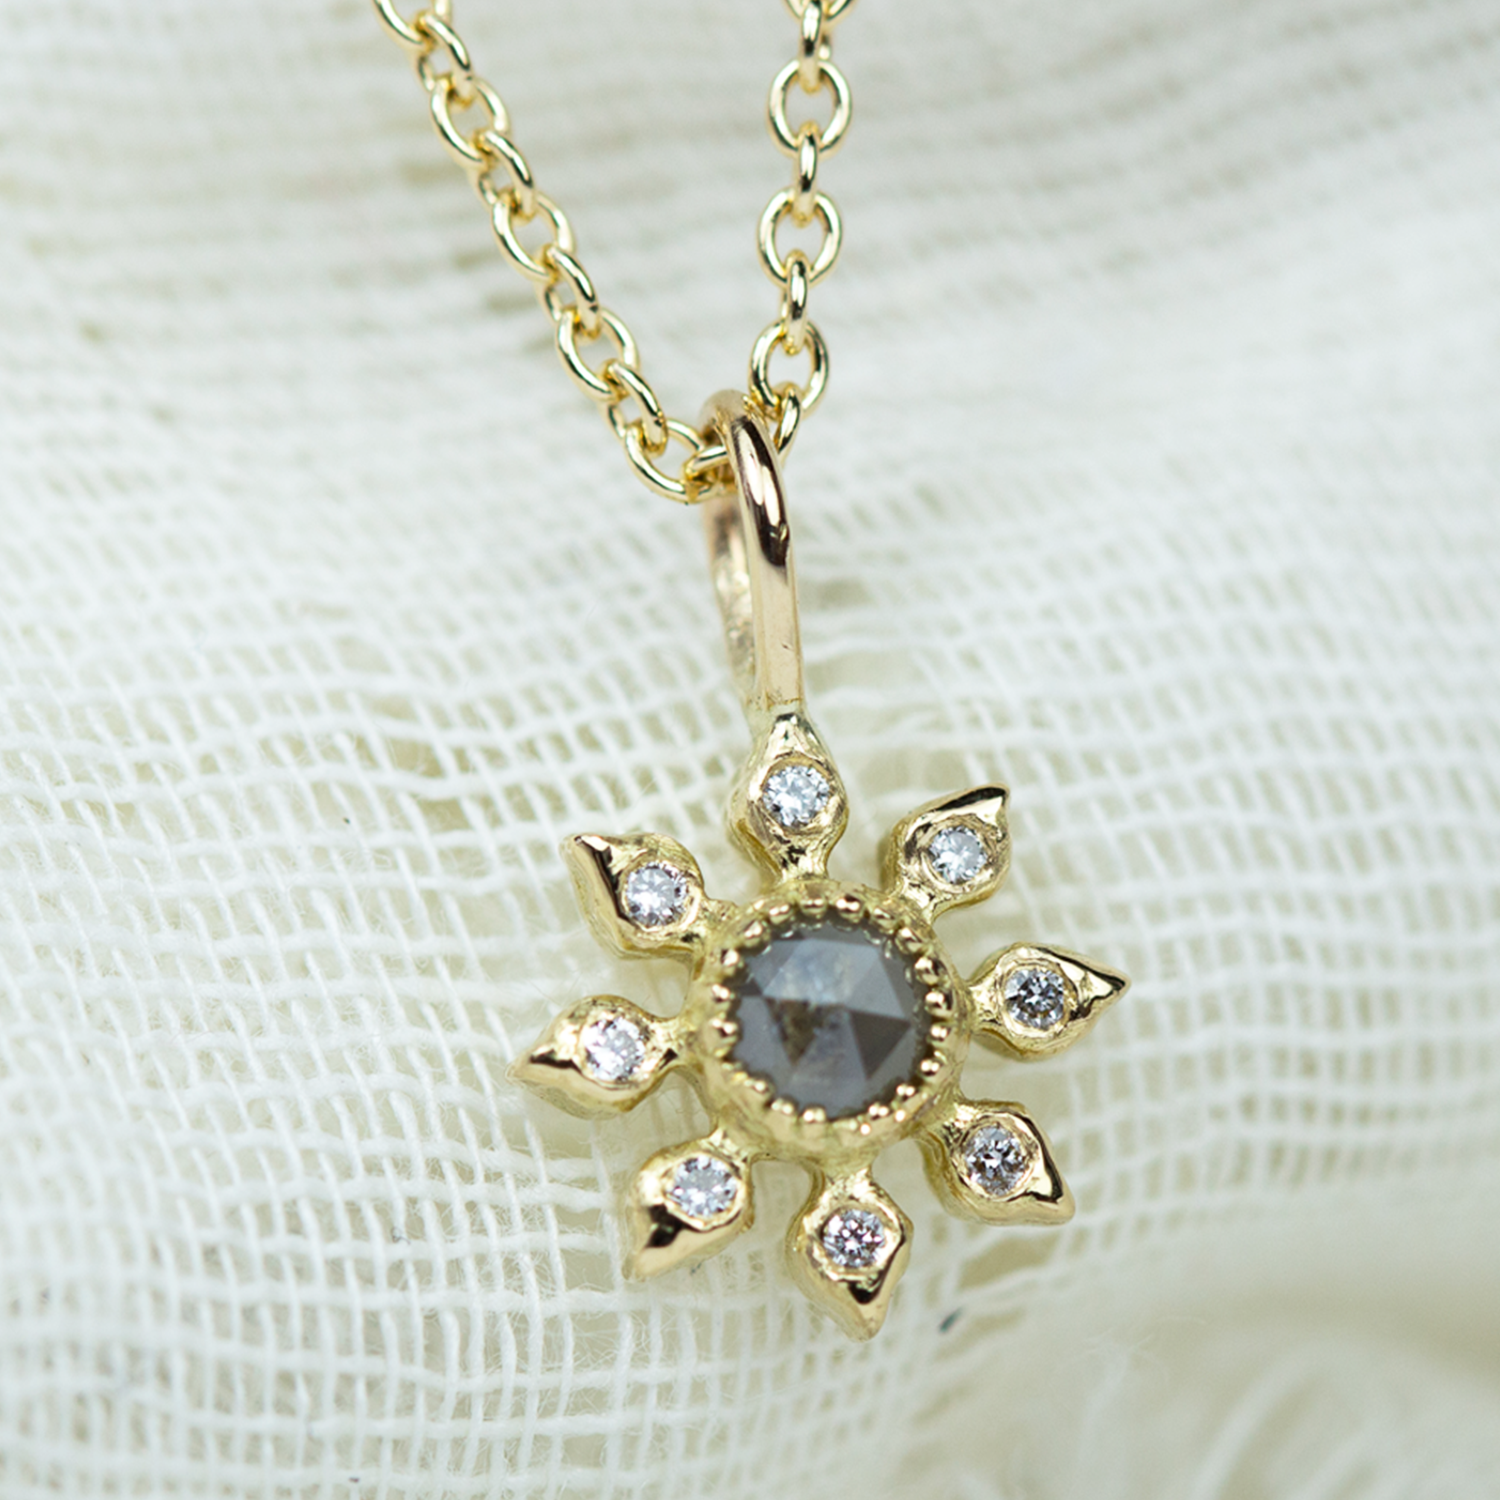 Swarovski Crystal White and Yellow Eternal Flower Pendant Necklace, Rhodium  Plated | REEDS Jewelers